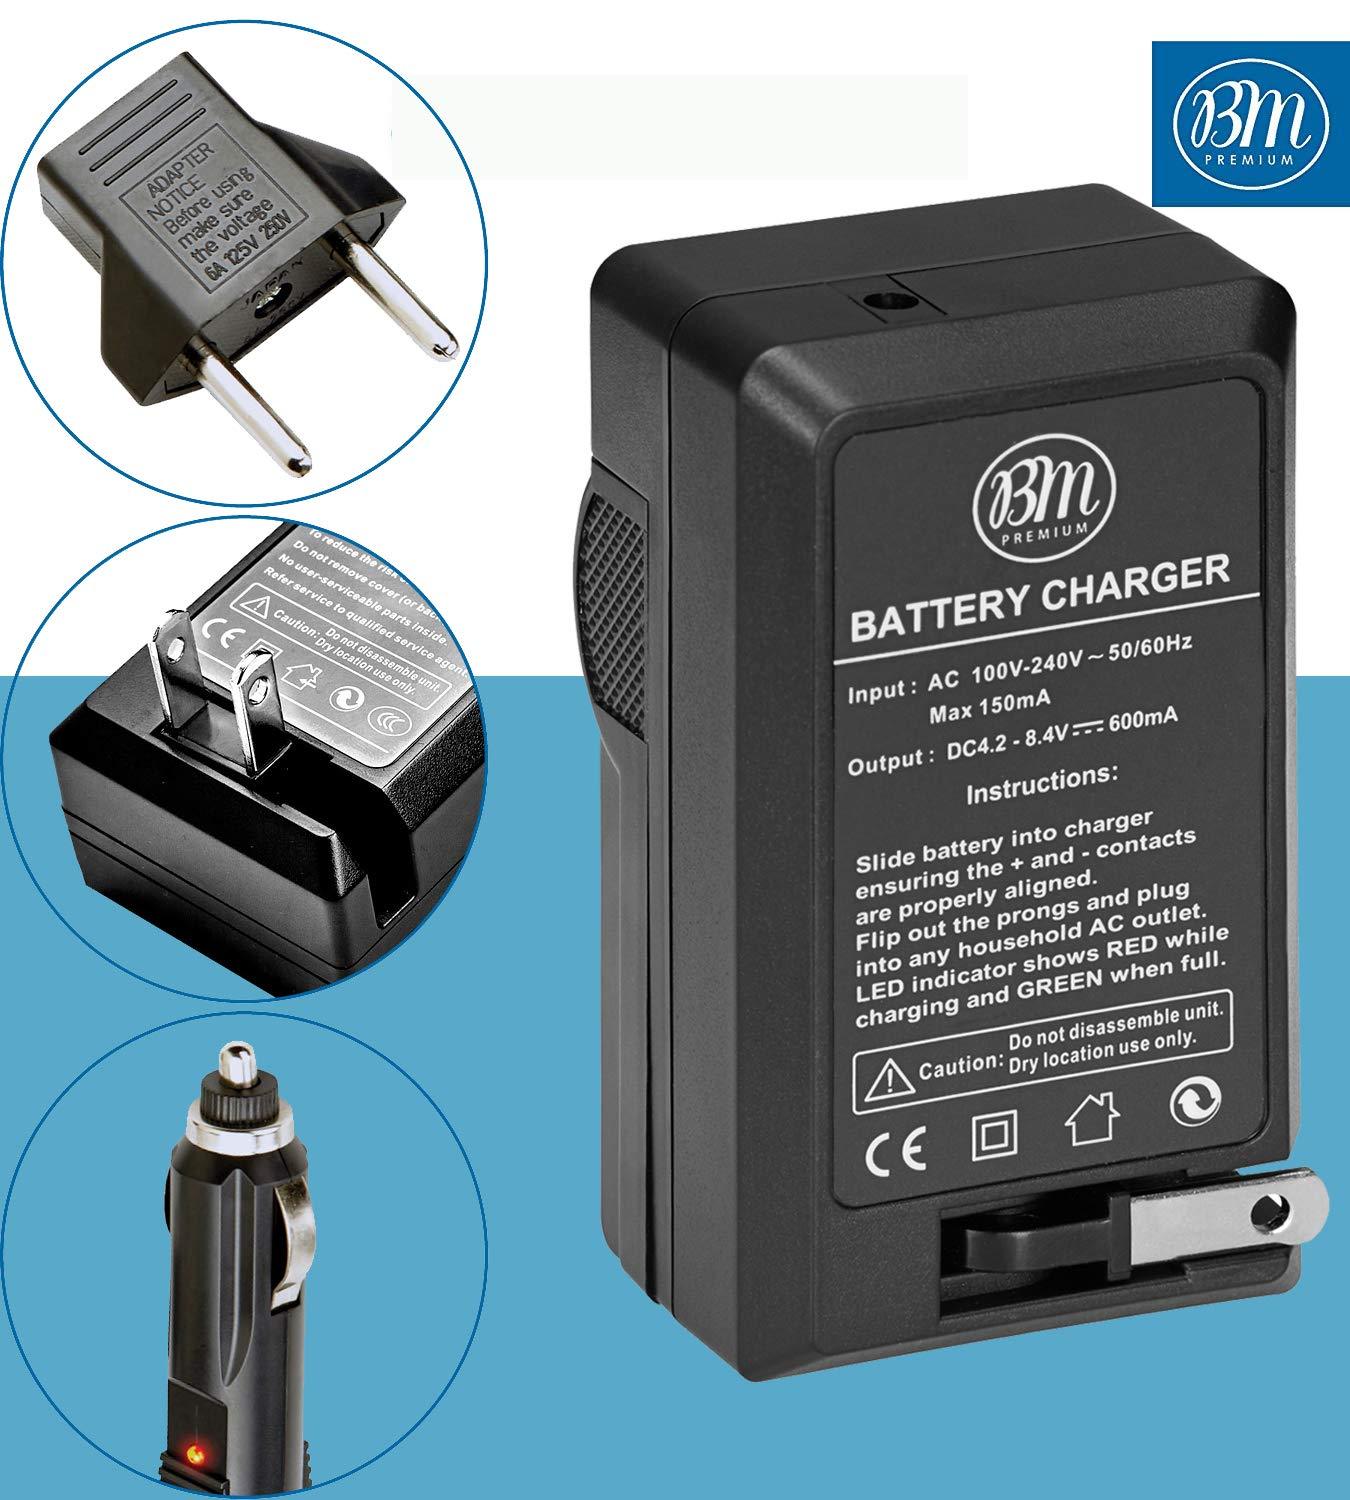 EN-EL23 Battery Charger for B700 P600 P610 P900 S810c Digital Camera + More!! (6 month warranty)-Camera Battery Chargers-dealsplant